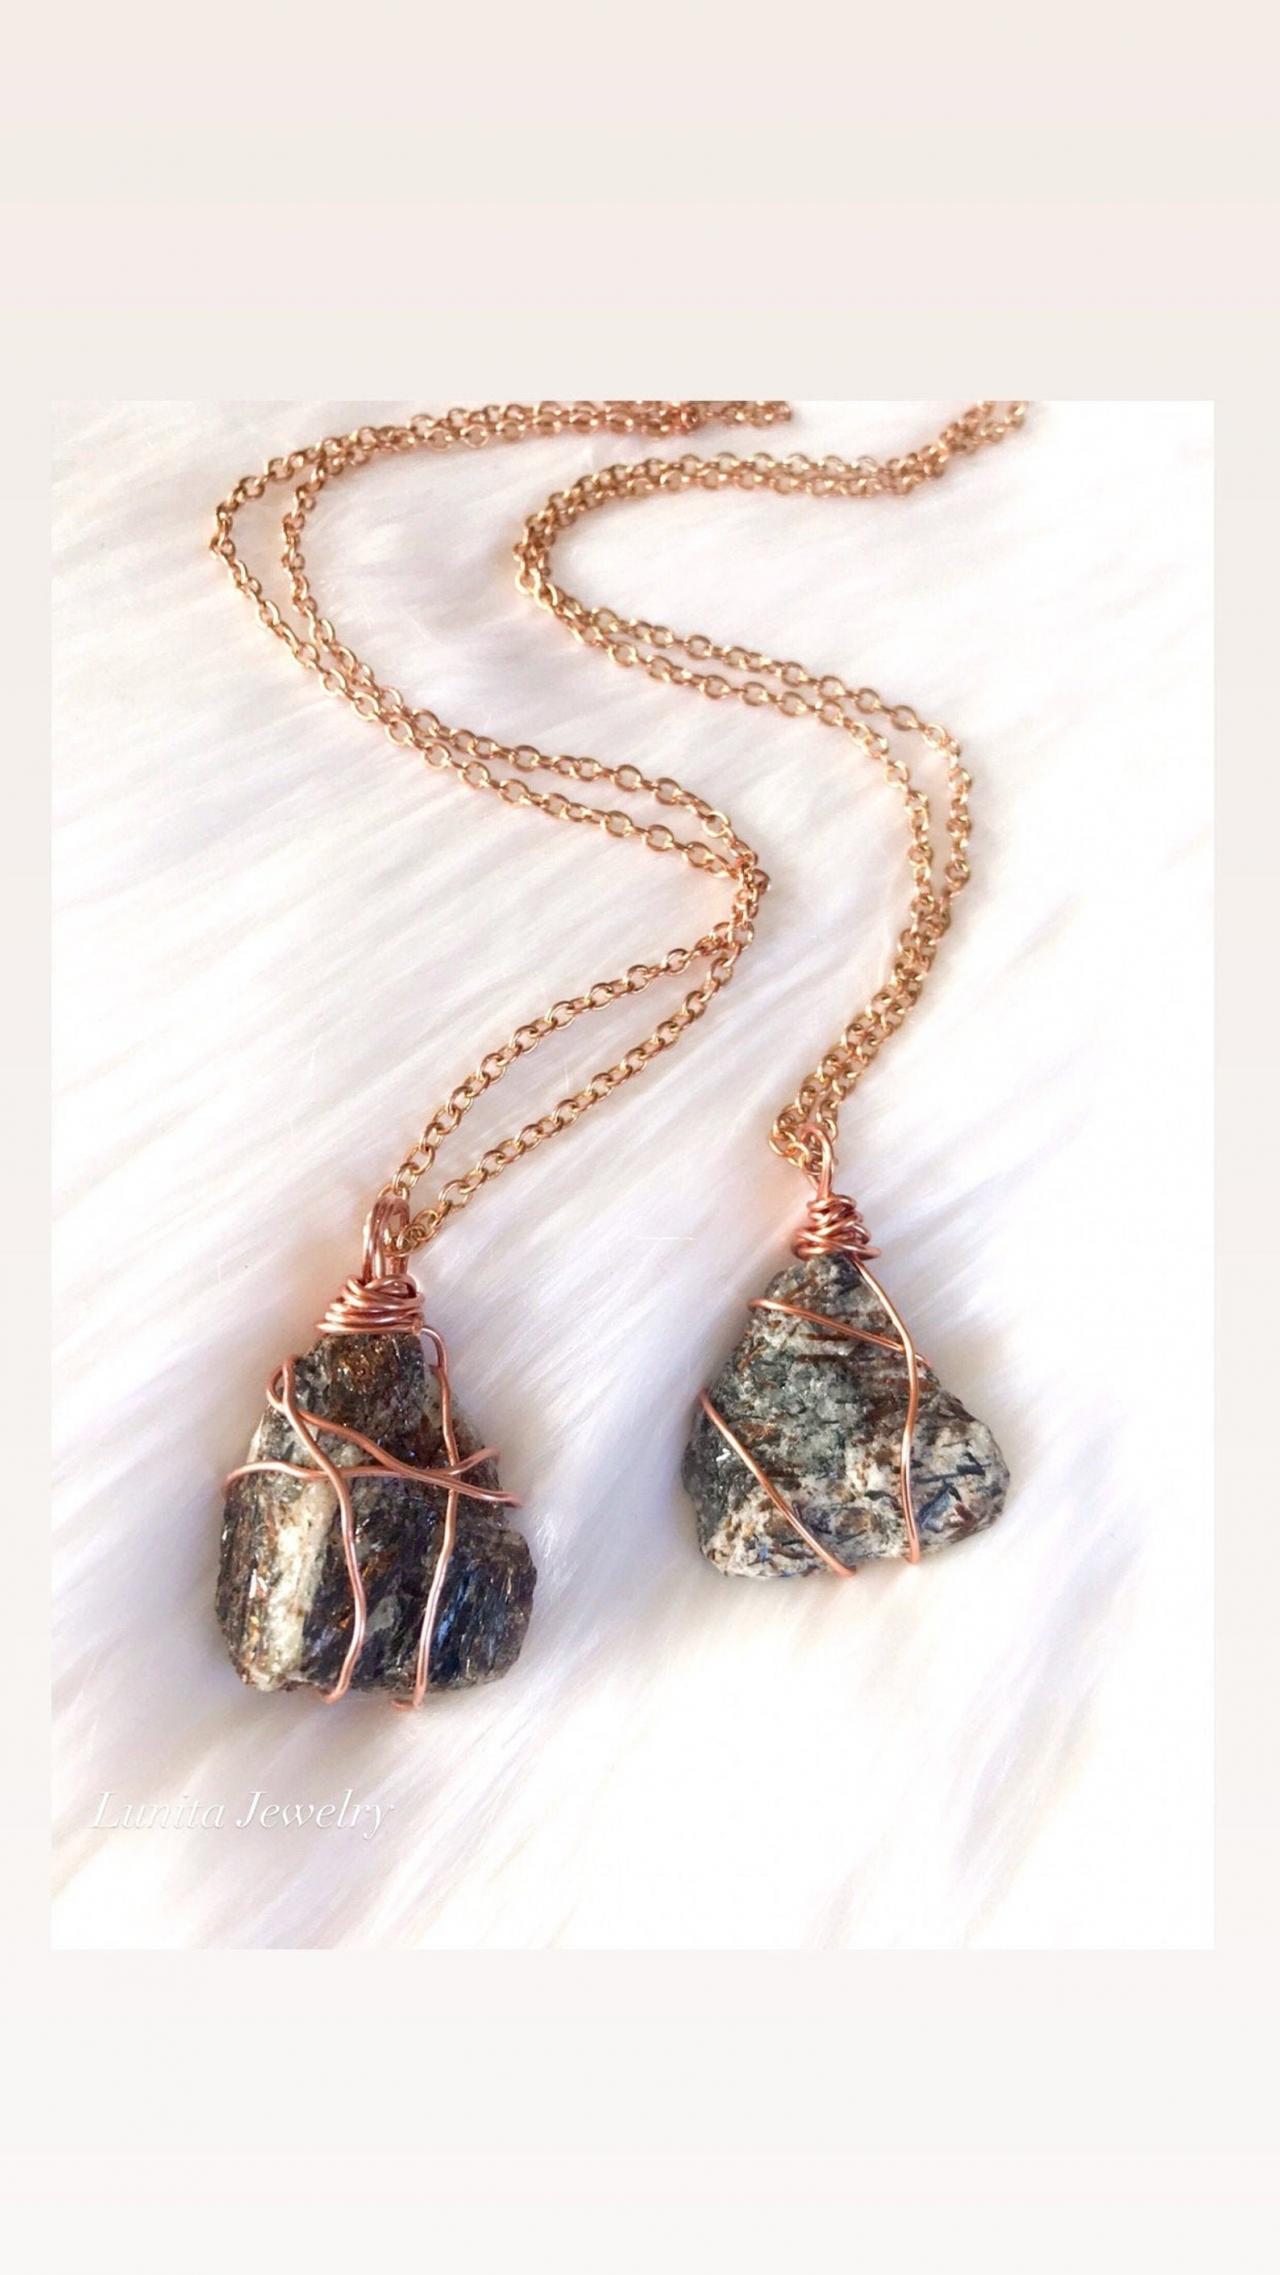 Raw Astrophyllite Crystal Necklacewith Copper; Rare Crystals; Copper Wrapped Crystal Jewelry; Russian Astrophyllite; Metaphysical